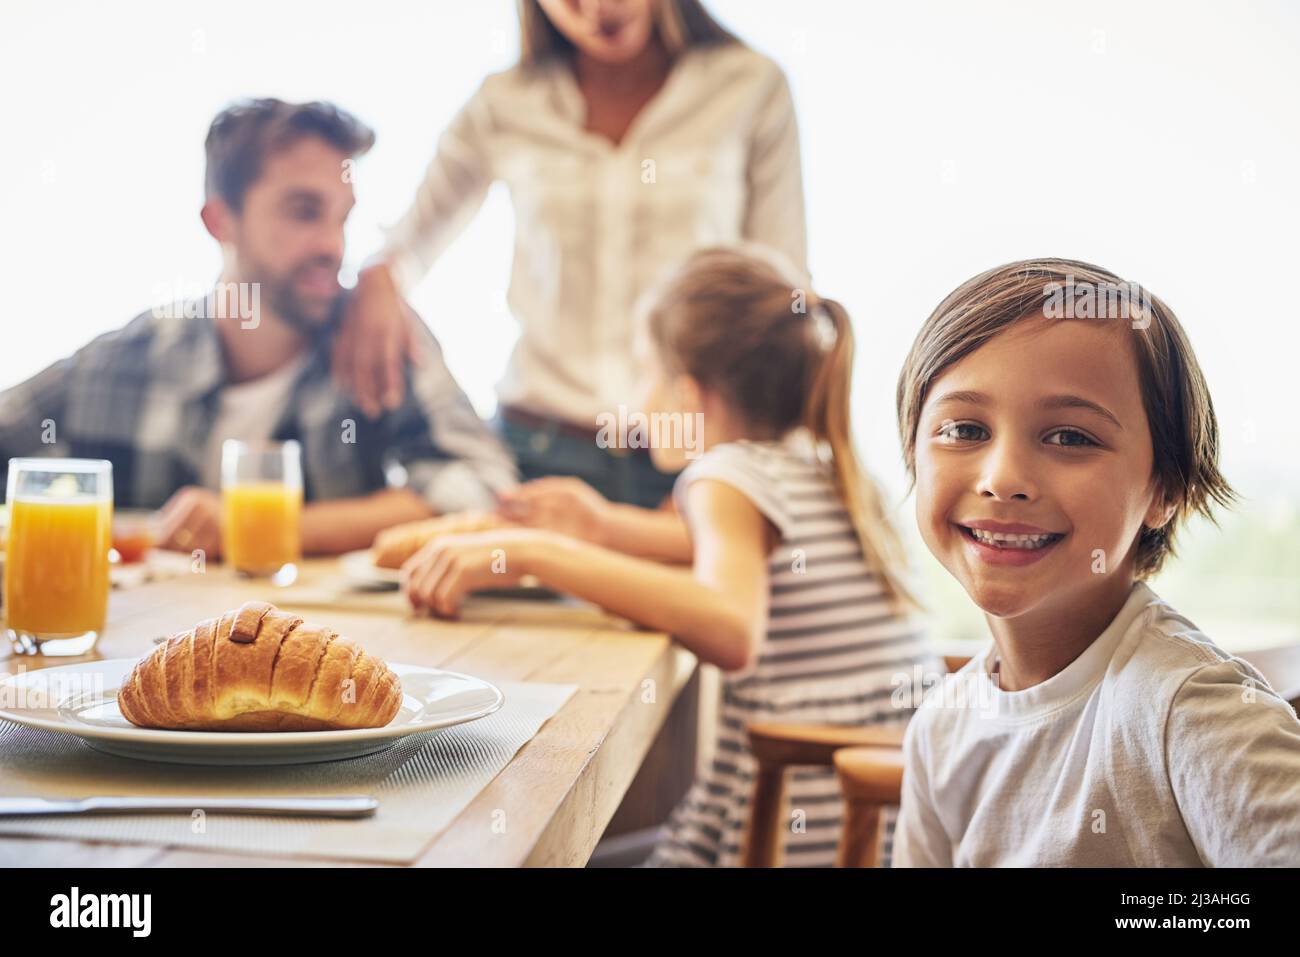 Were filling our tummies for the day ahead. Portrait of a little boy having breakfast with his family in the background. Stock Photo